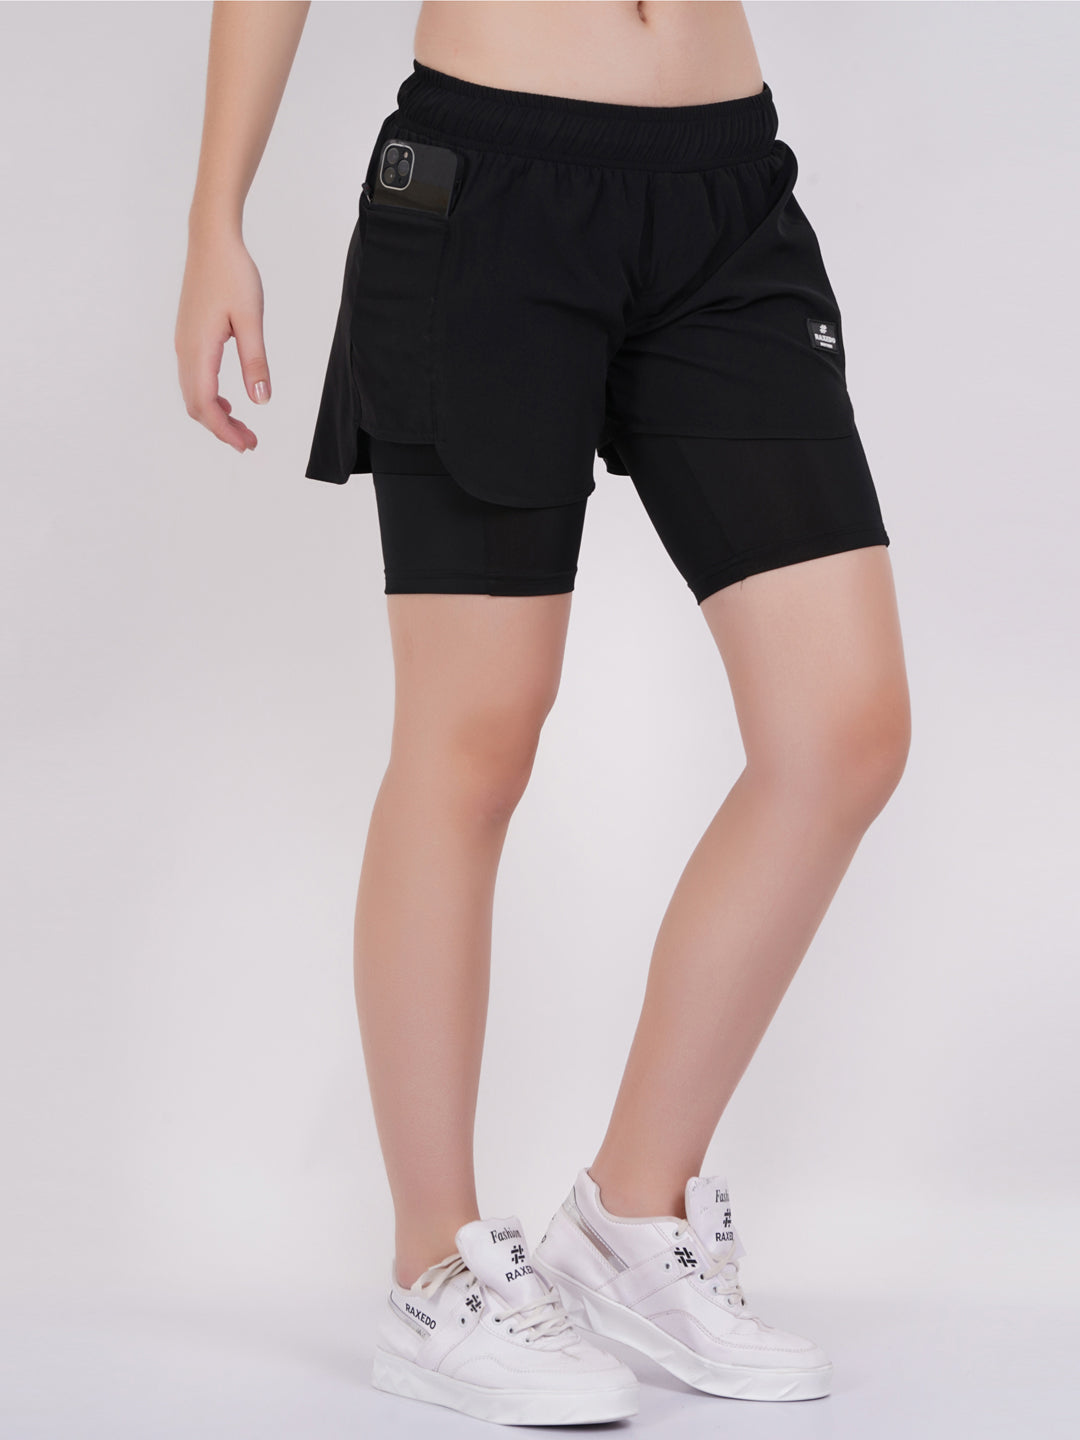 Shorts with Inner Tights